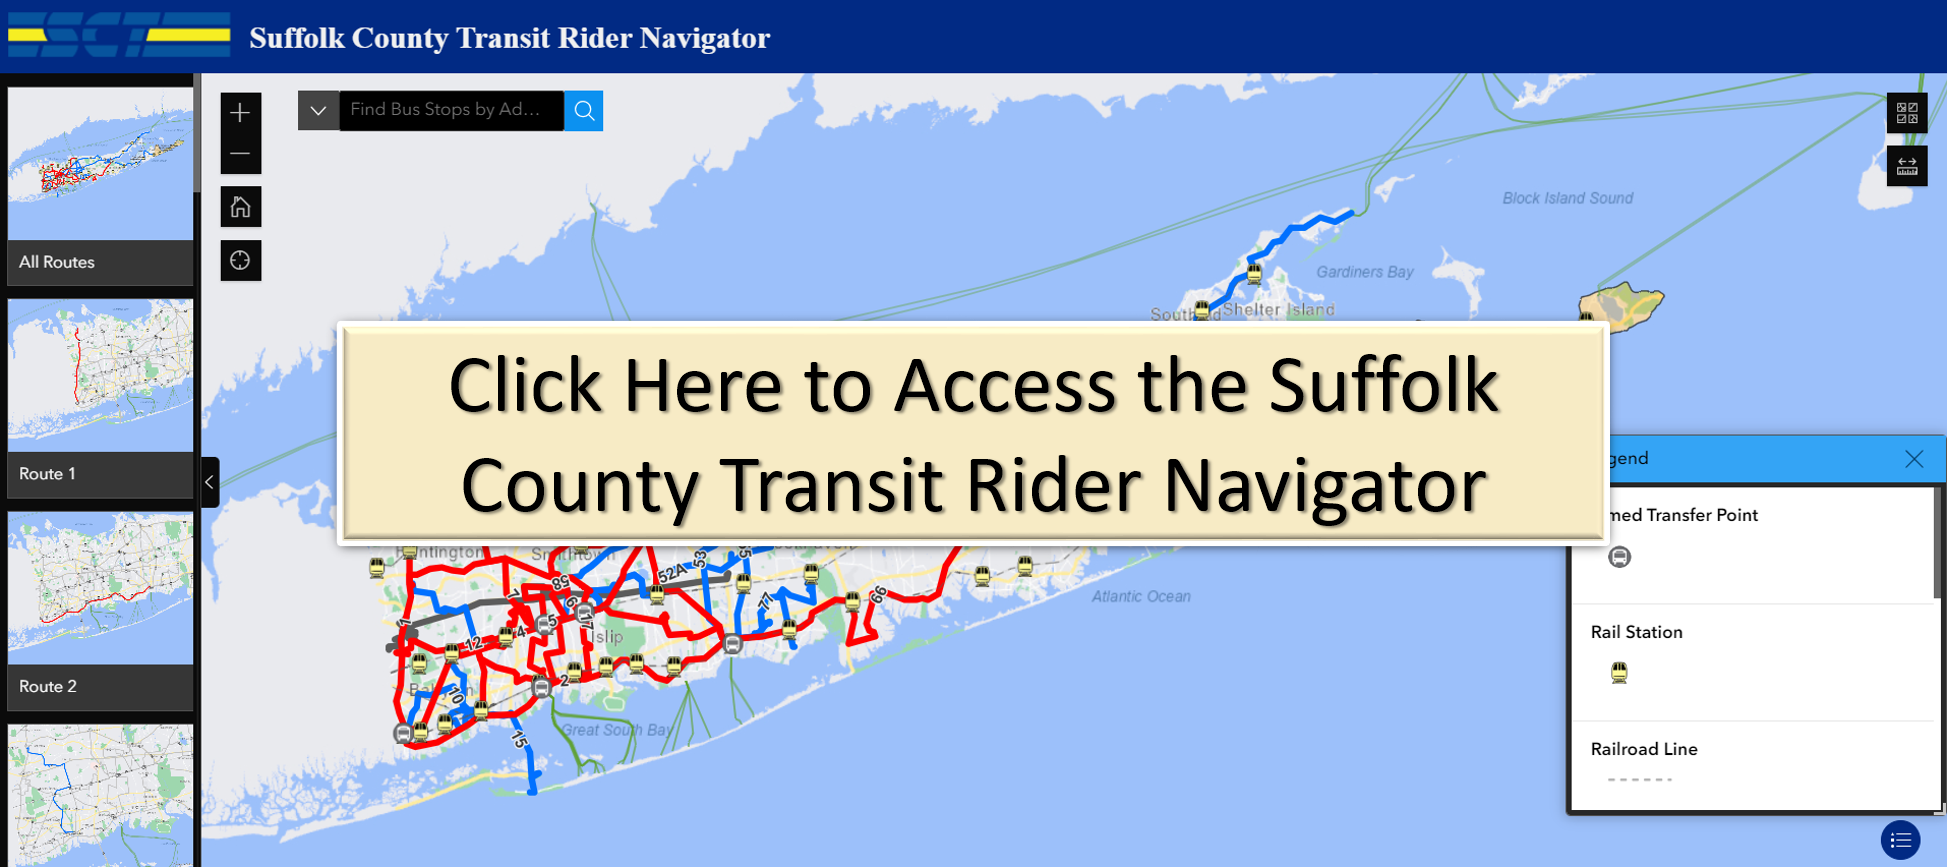 Click here to access the Suffolk County Transit Rider Navigator